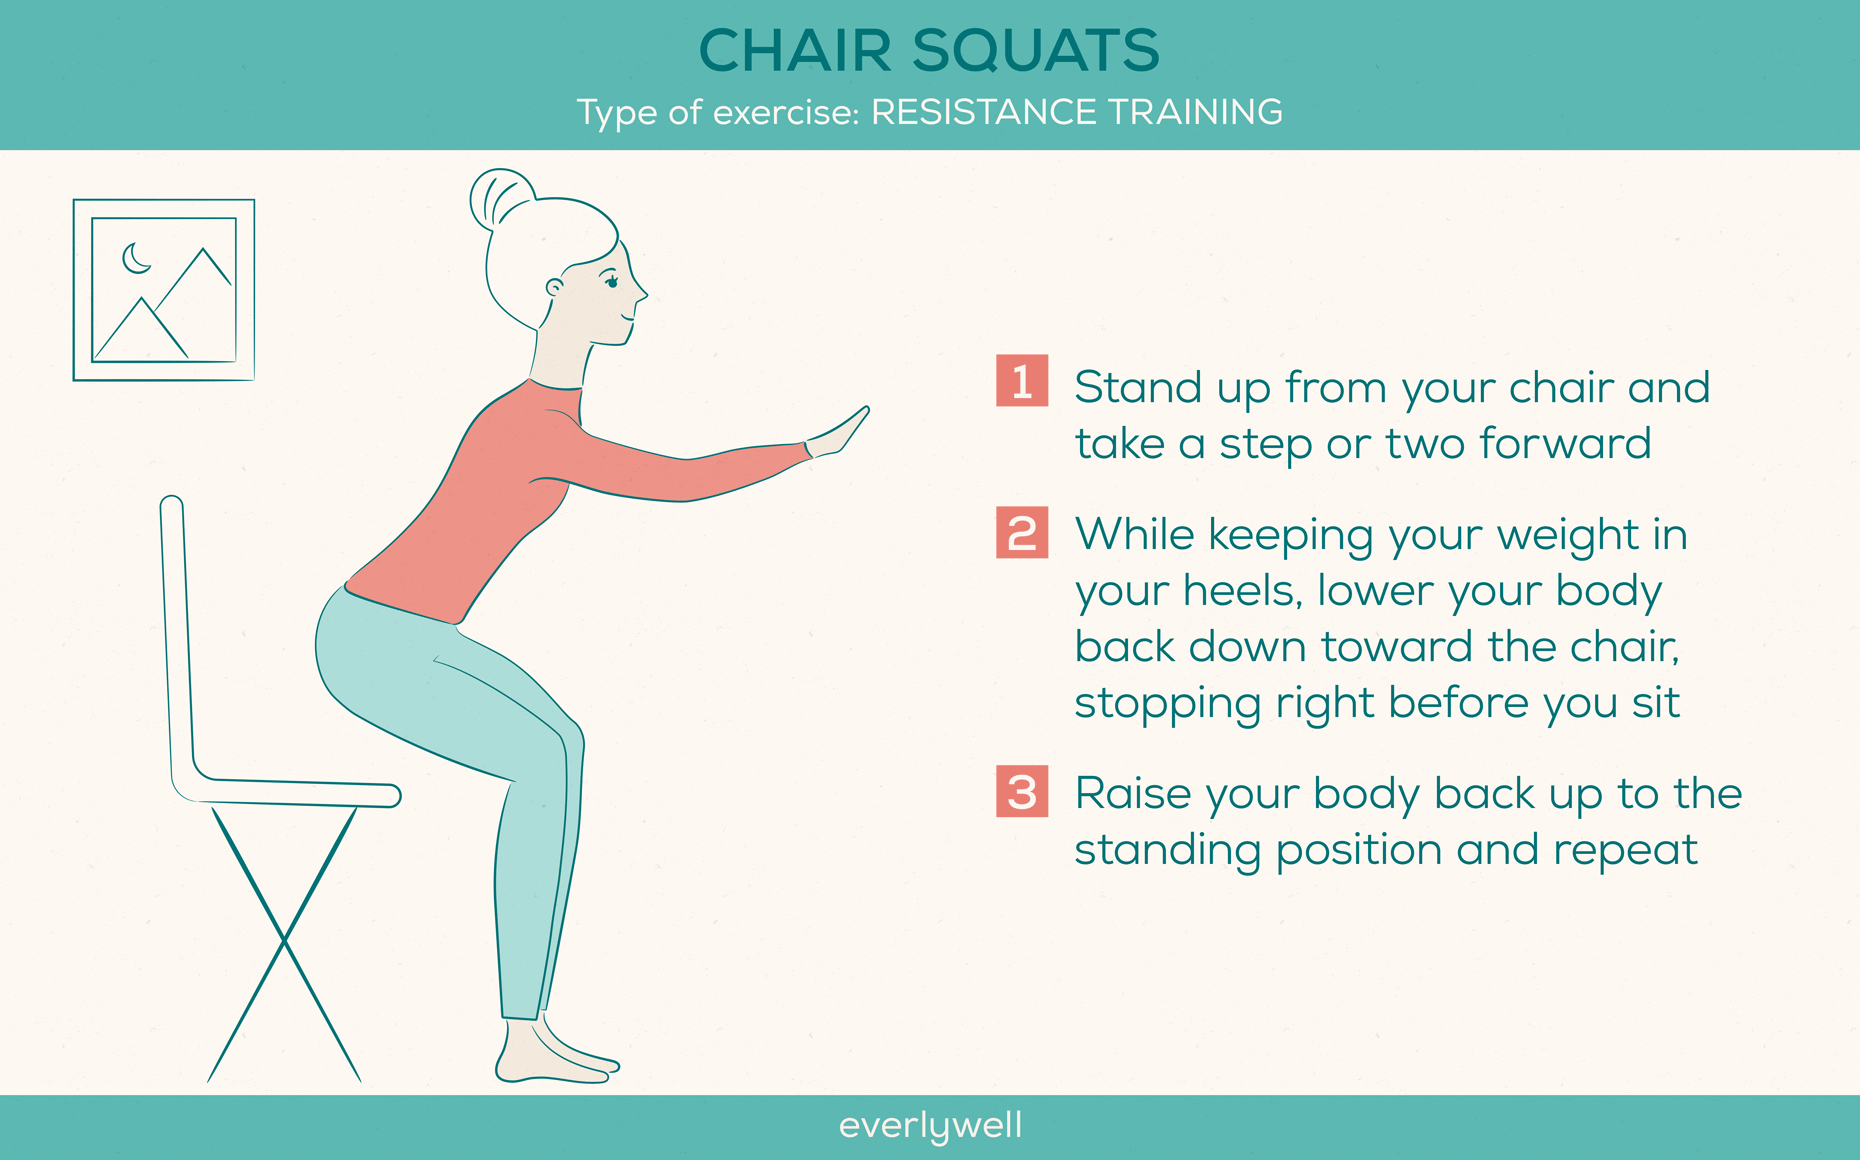 heart-healthy-exercises-chair-squats-logo